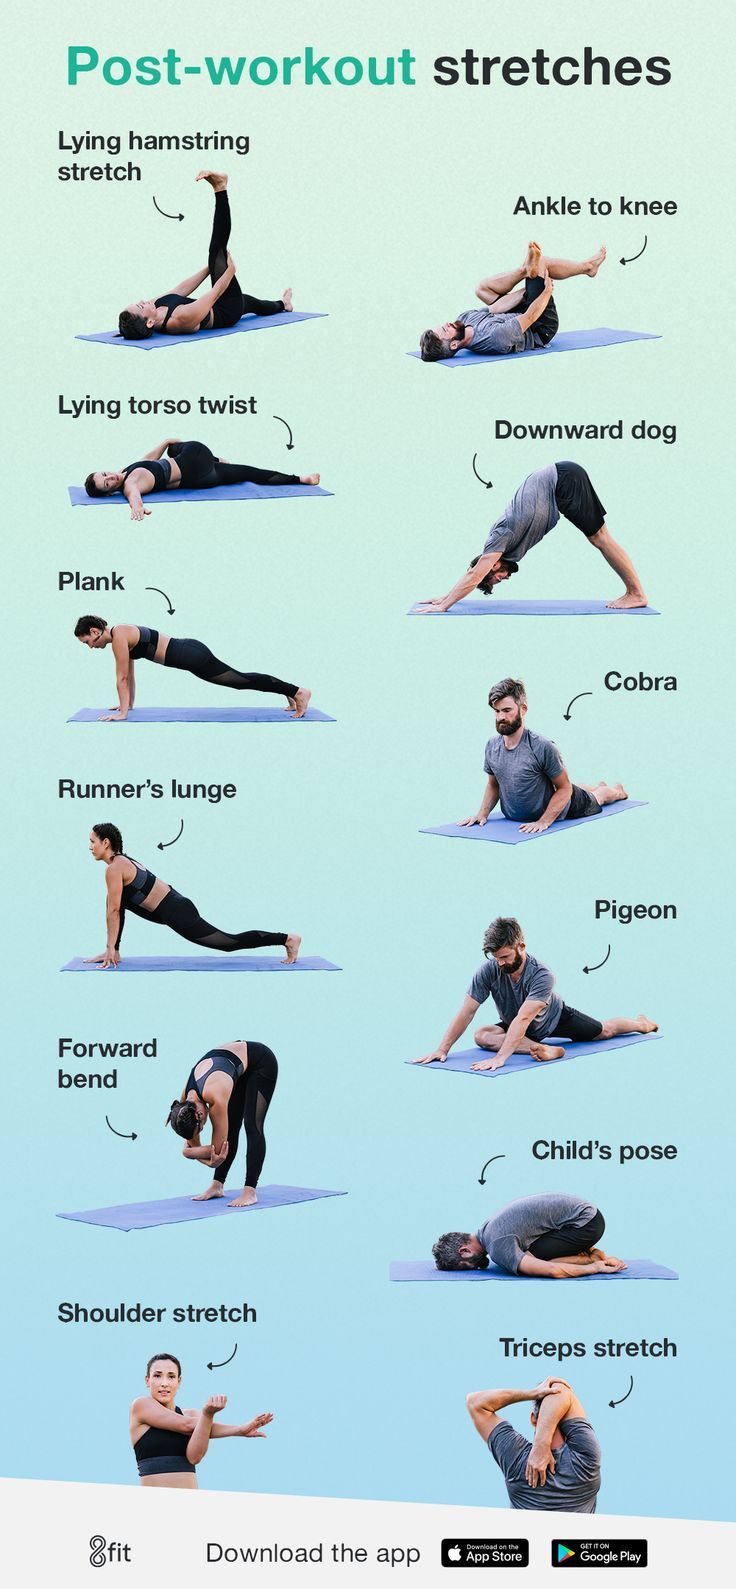 Here’s a great post-workout stretching guide. Click to learn how to do each stretch